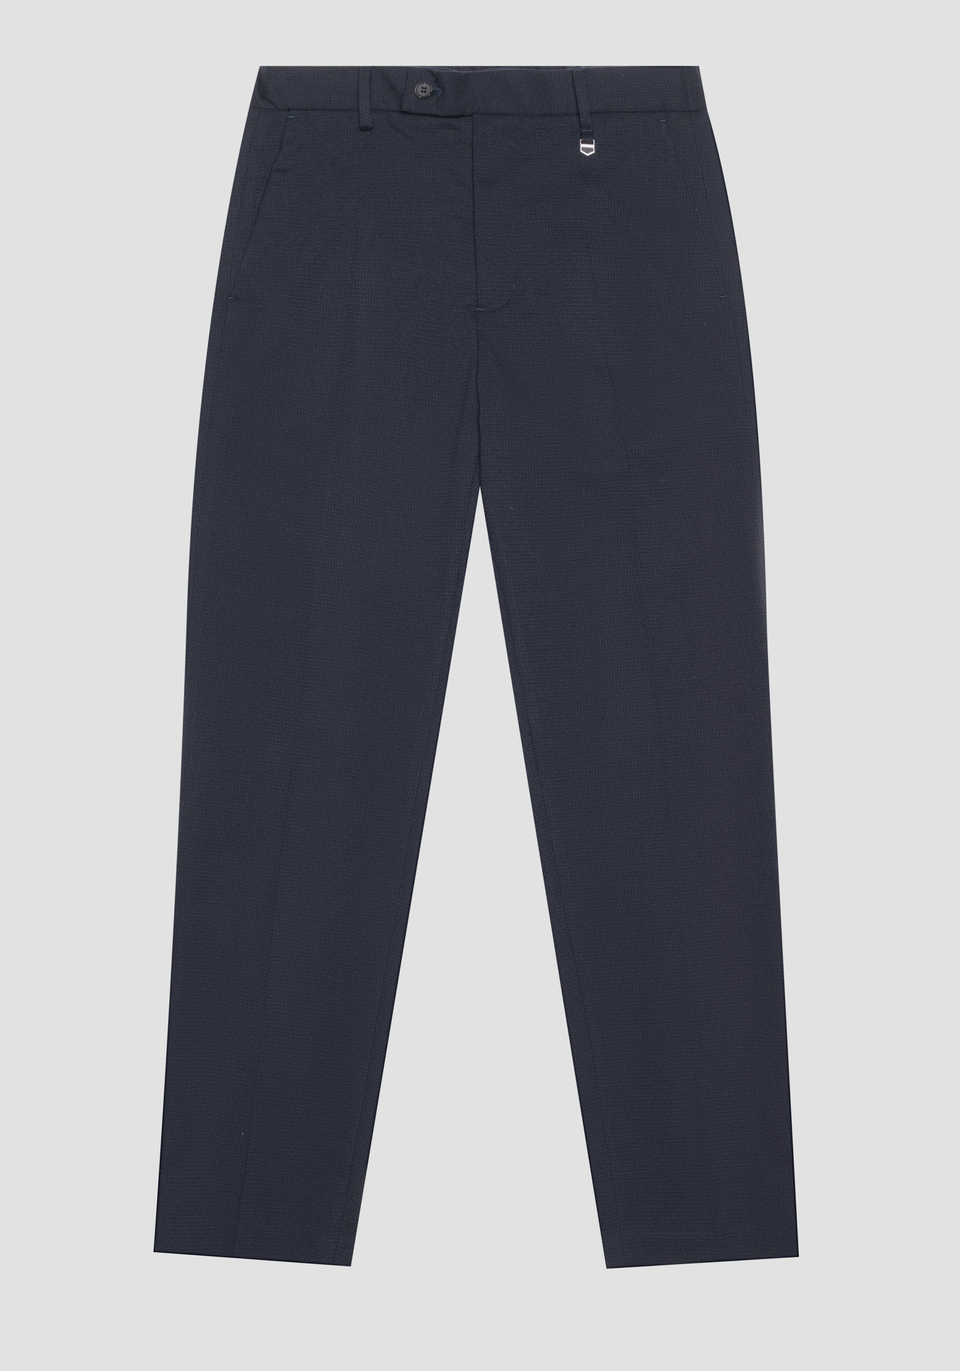 "PHIL" REGULAR STRAIGHT FIT TROUSERS IN ELASTIC VISCOSE BLEND DOBBY FABRIC - Antony Morato Online Shop